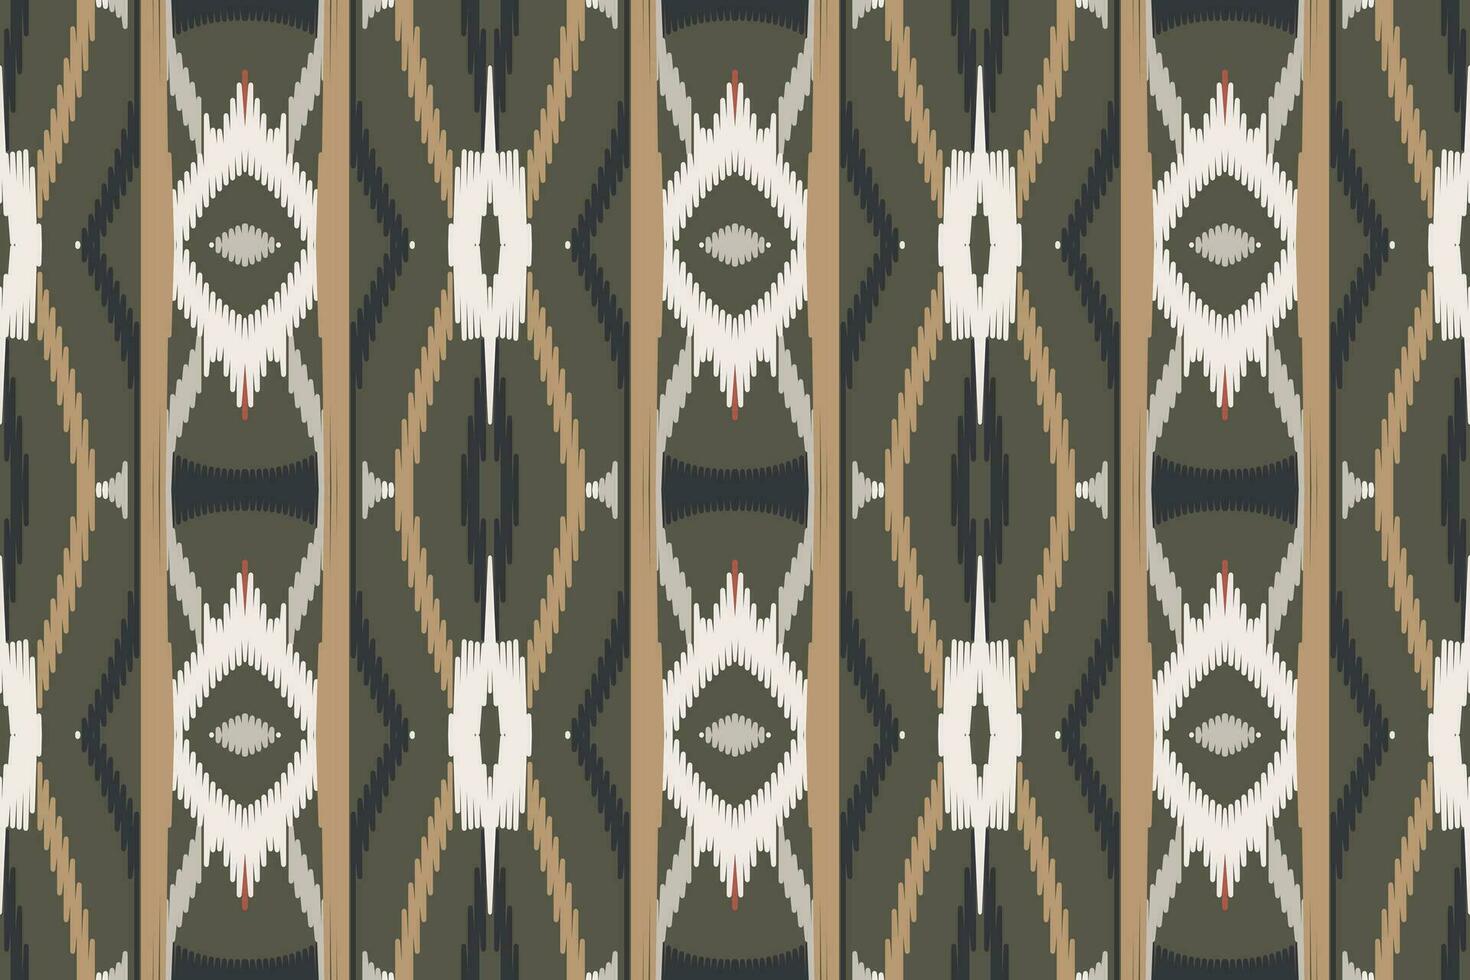 Motif Ikat Seamless Pattern Embroidery Background. Ikat Stripe Geometric Ethnic Oriental Pattern Traditional. Ikat Aztec Style Abstract Design for Print Texture,fabric,saree,sari,carpet. vector